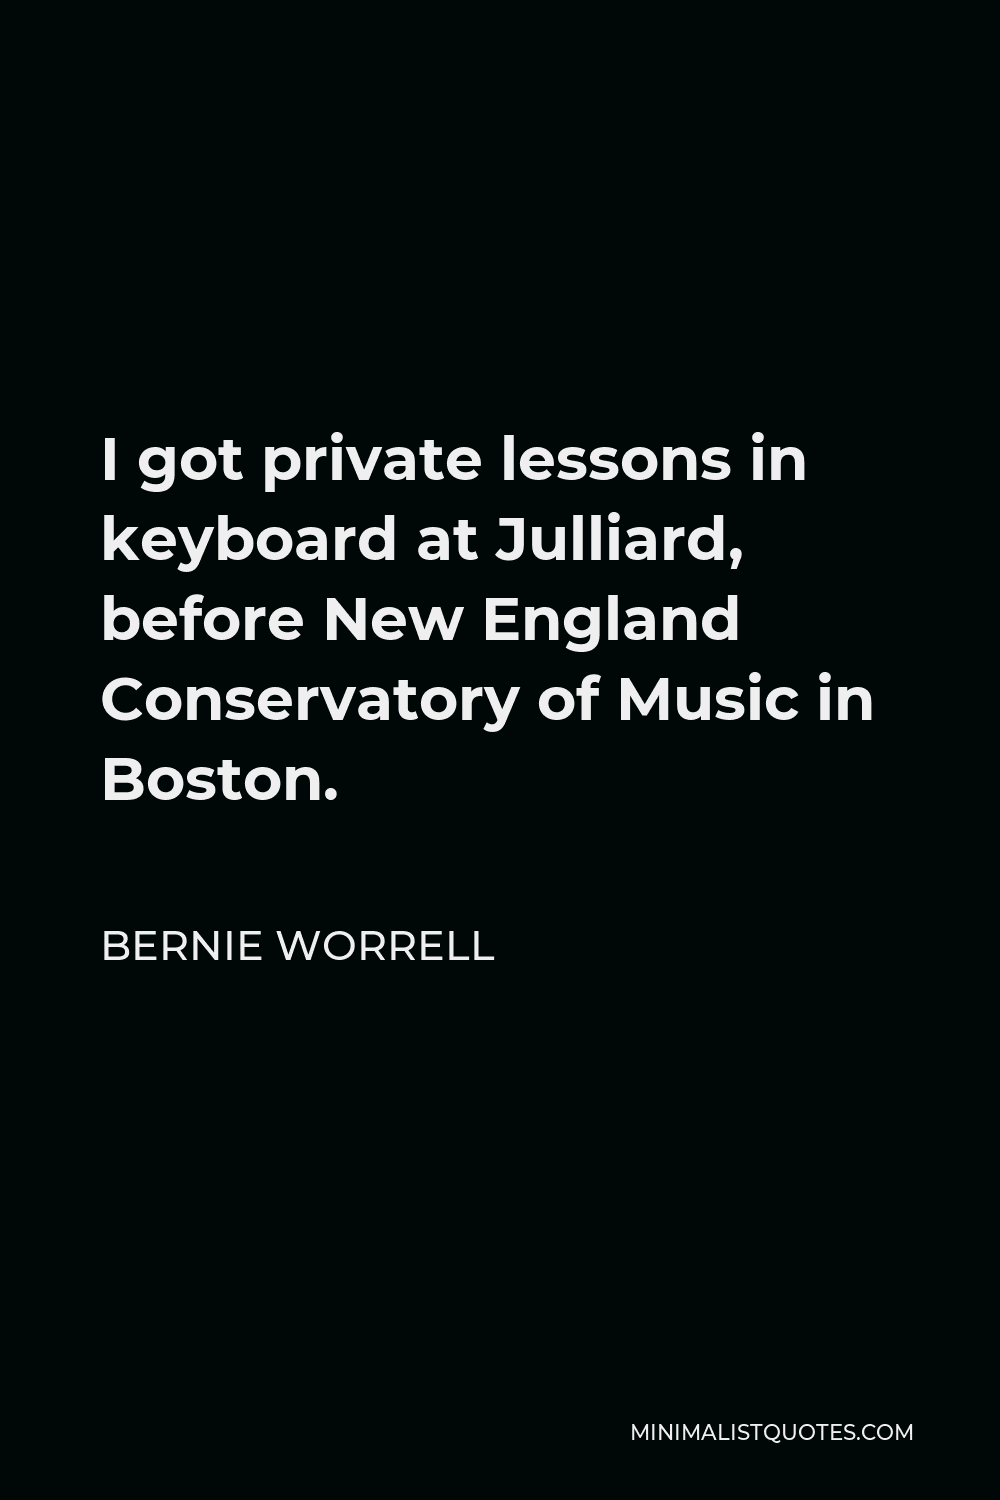 Bernie Worrell Quote - I got private lessons in keyboard at Julliard, before New England Conservatory of Music in Boston.